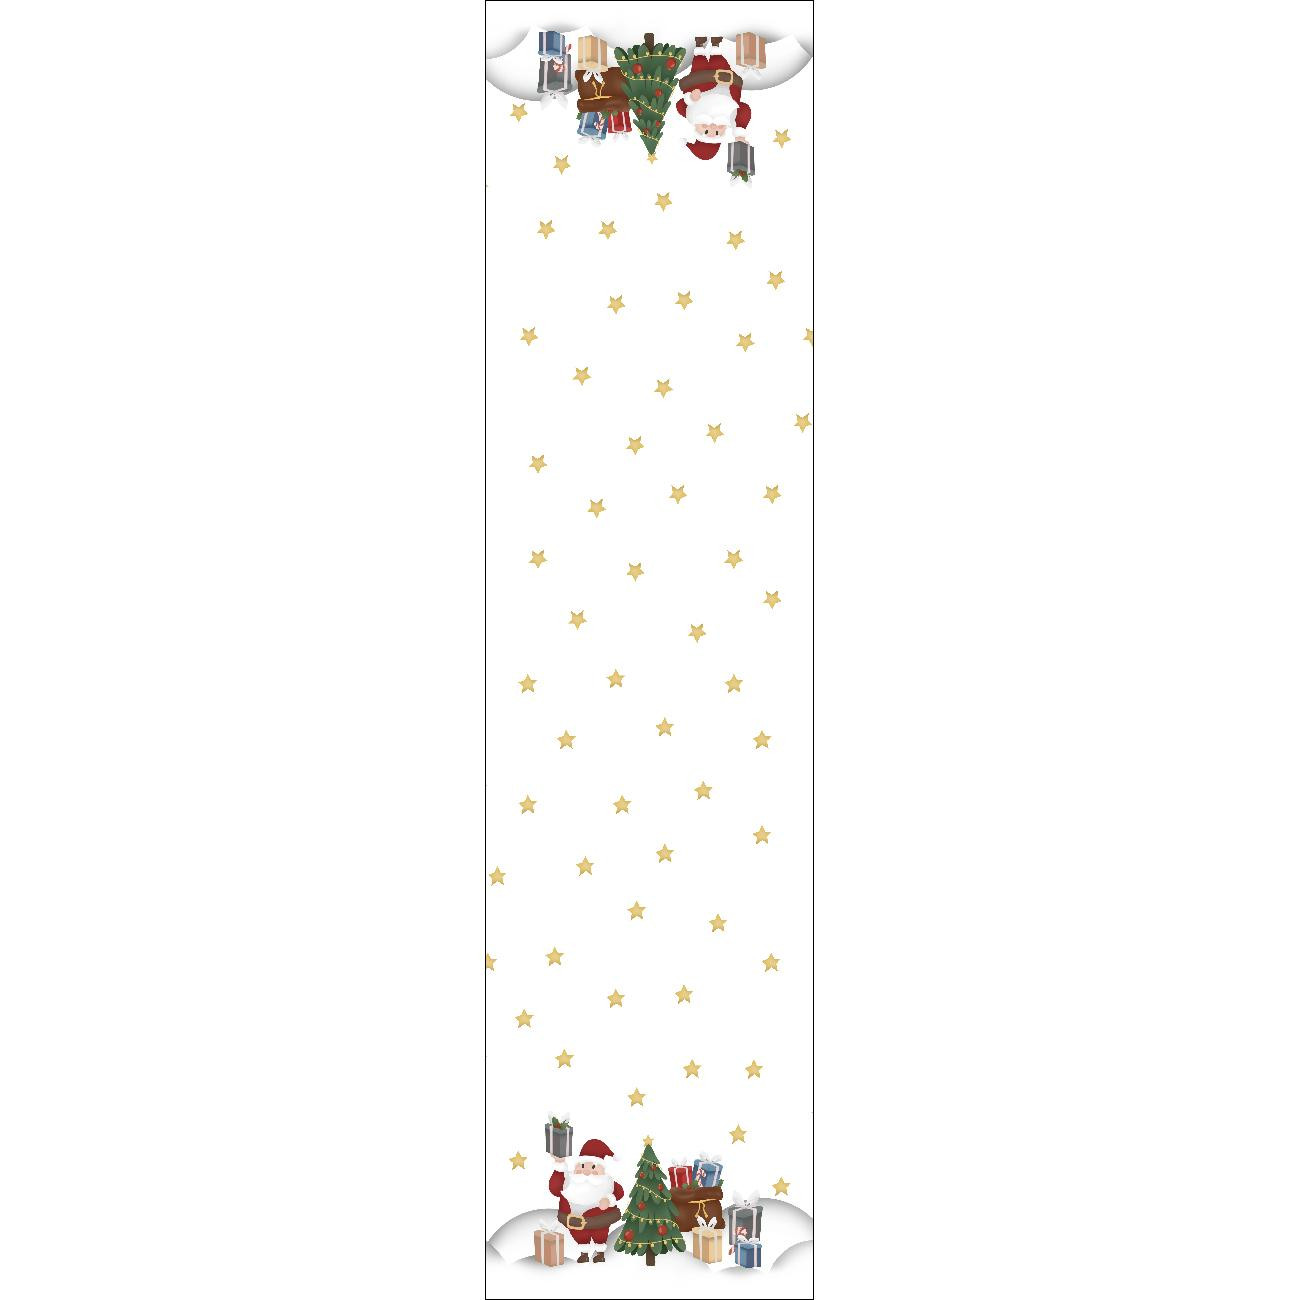 TABLE RUNNER PANEL - IN THE SANTA CLAUS FOREST